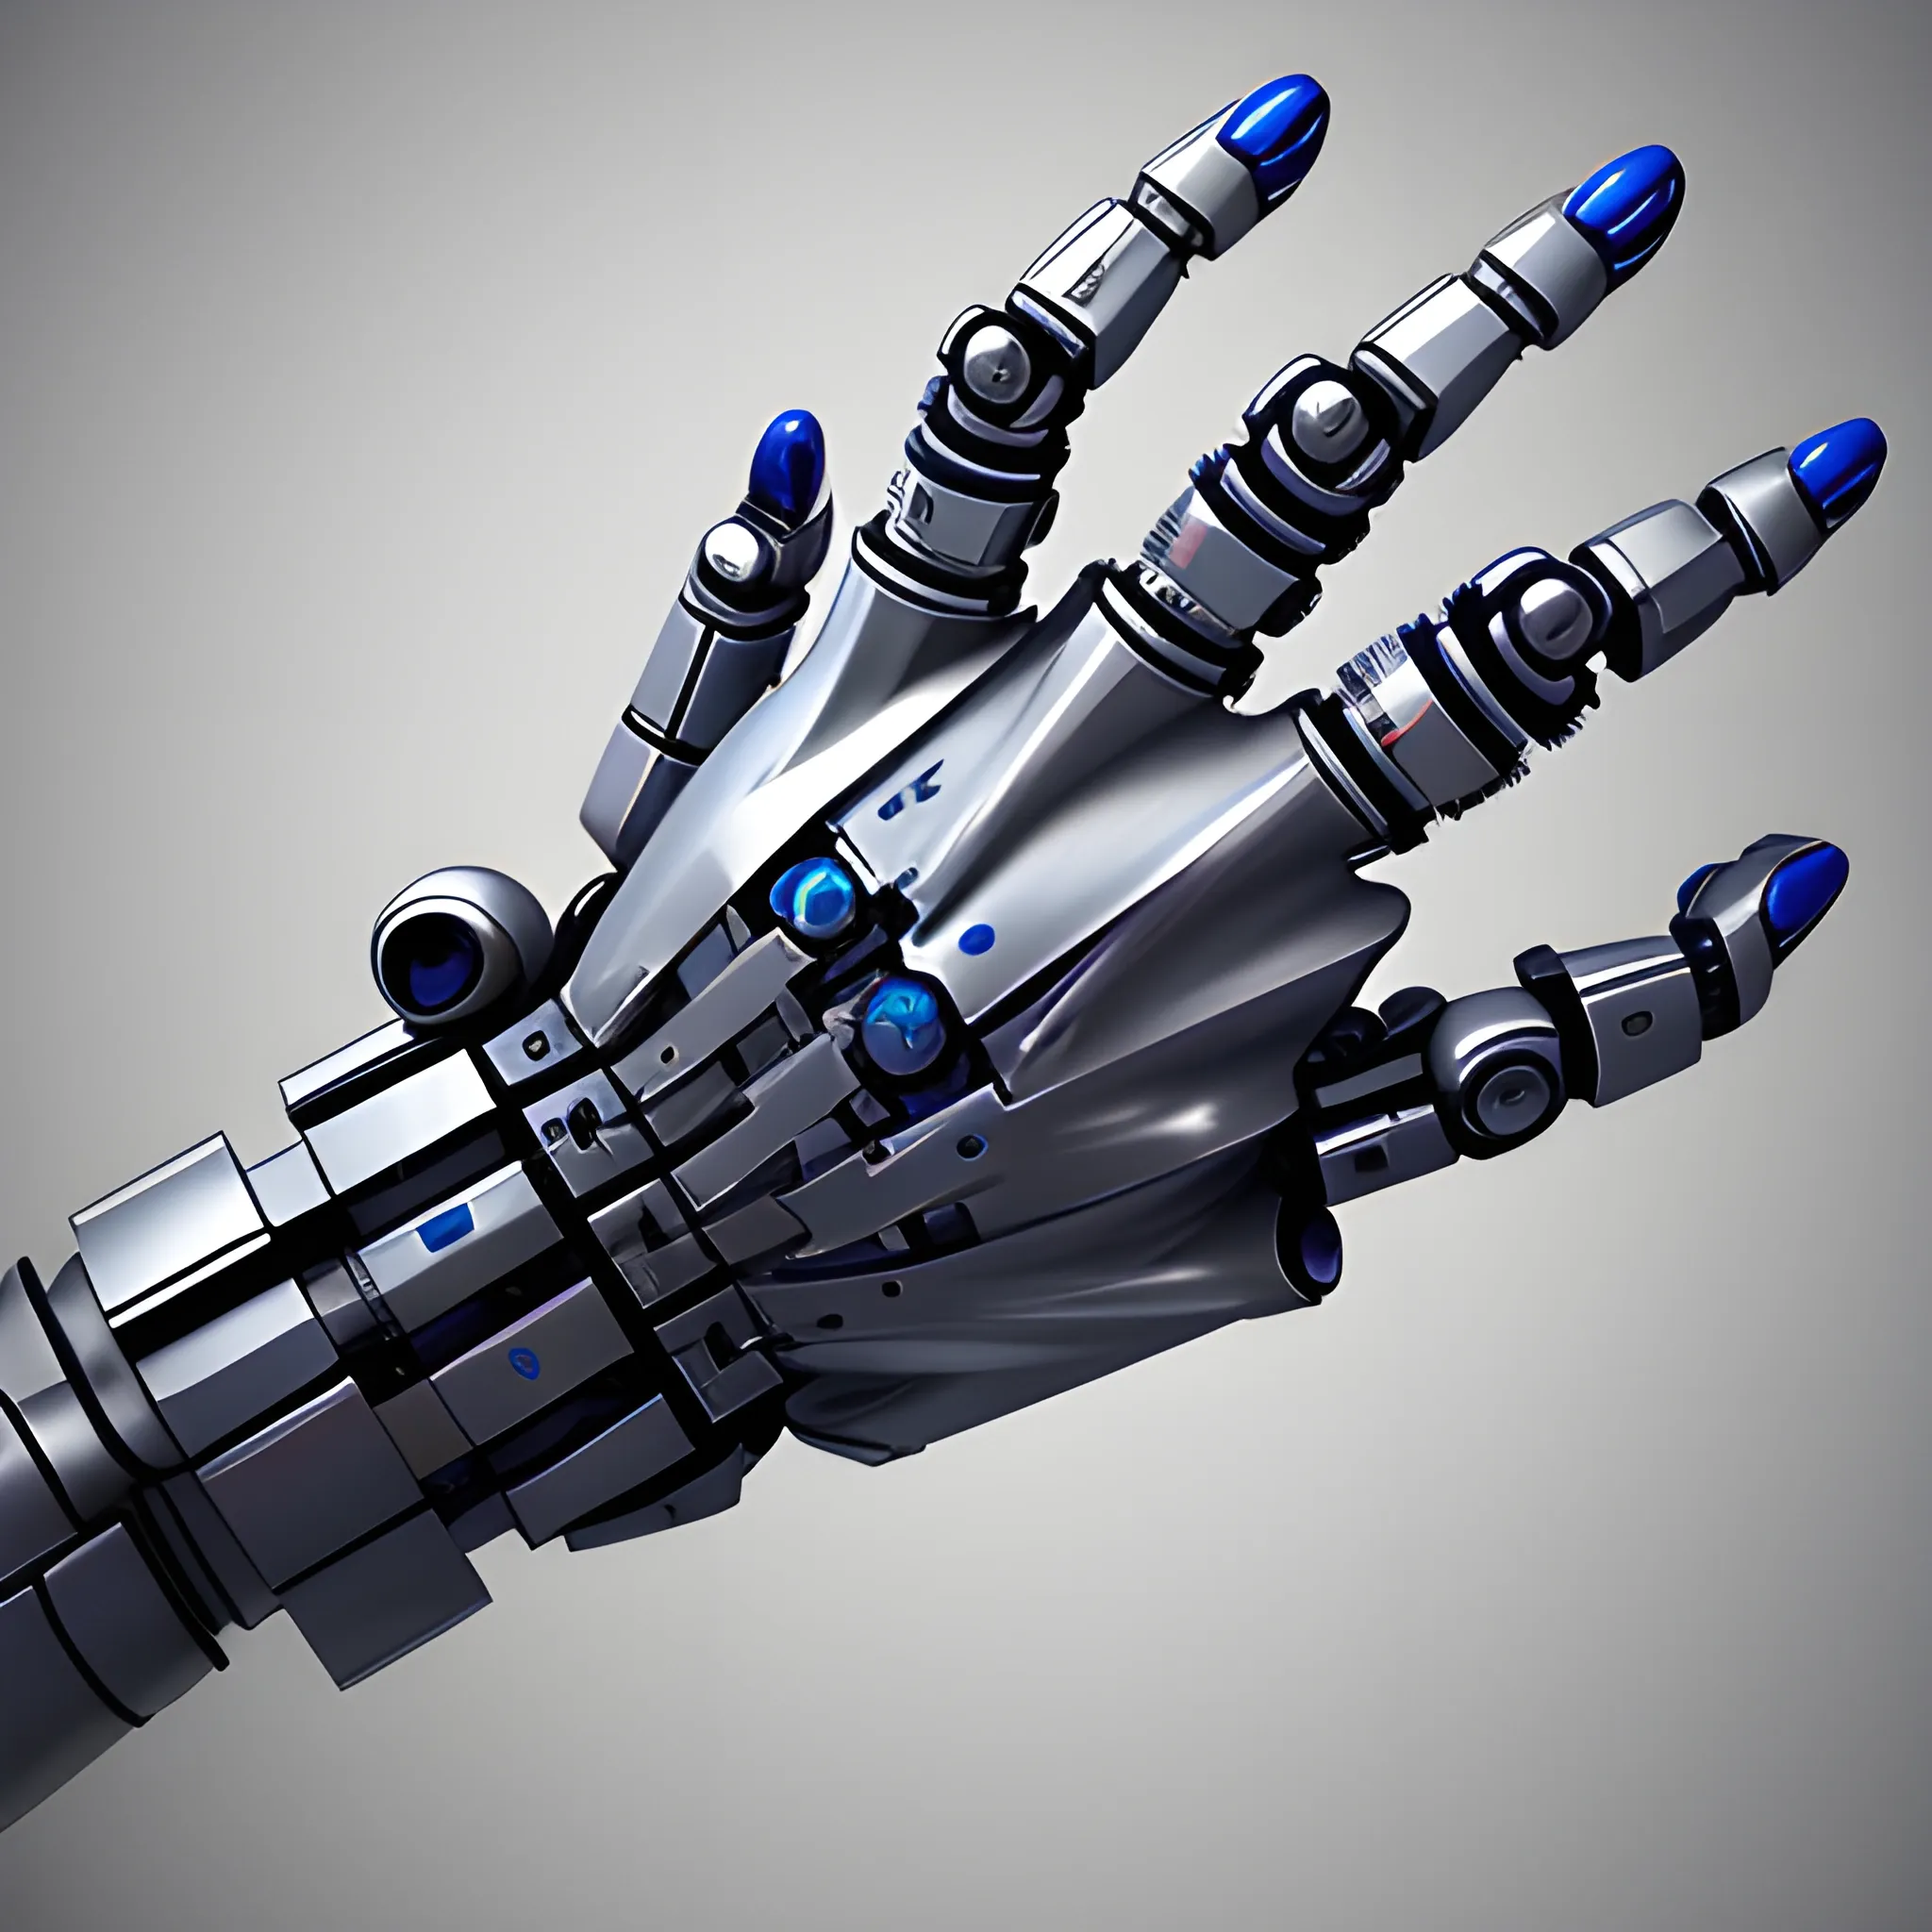 A Robot hand, in pose like